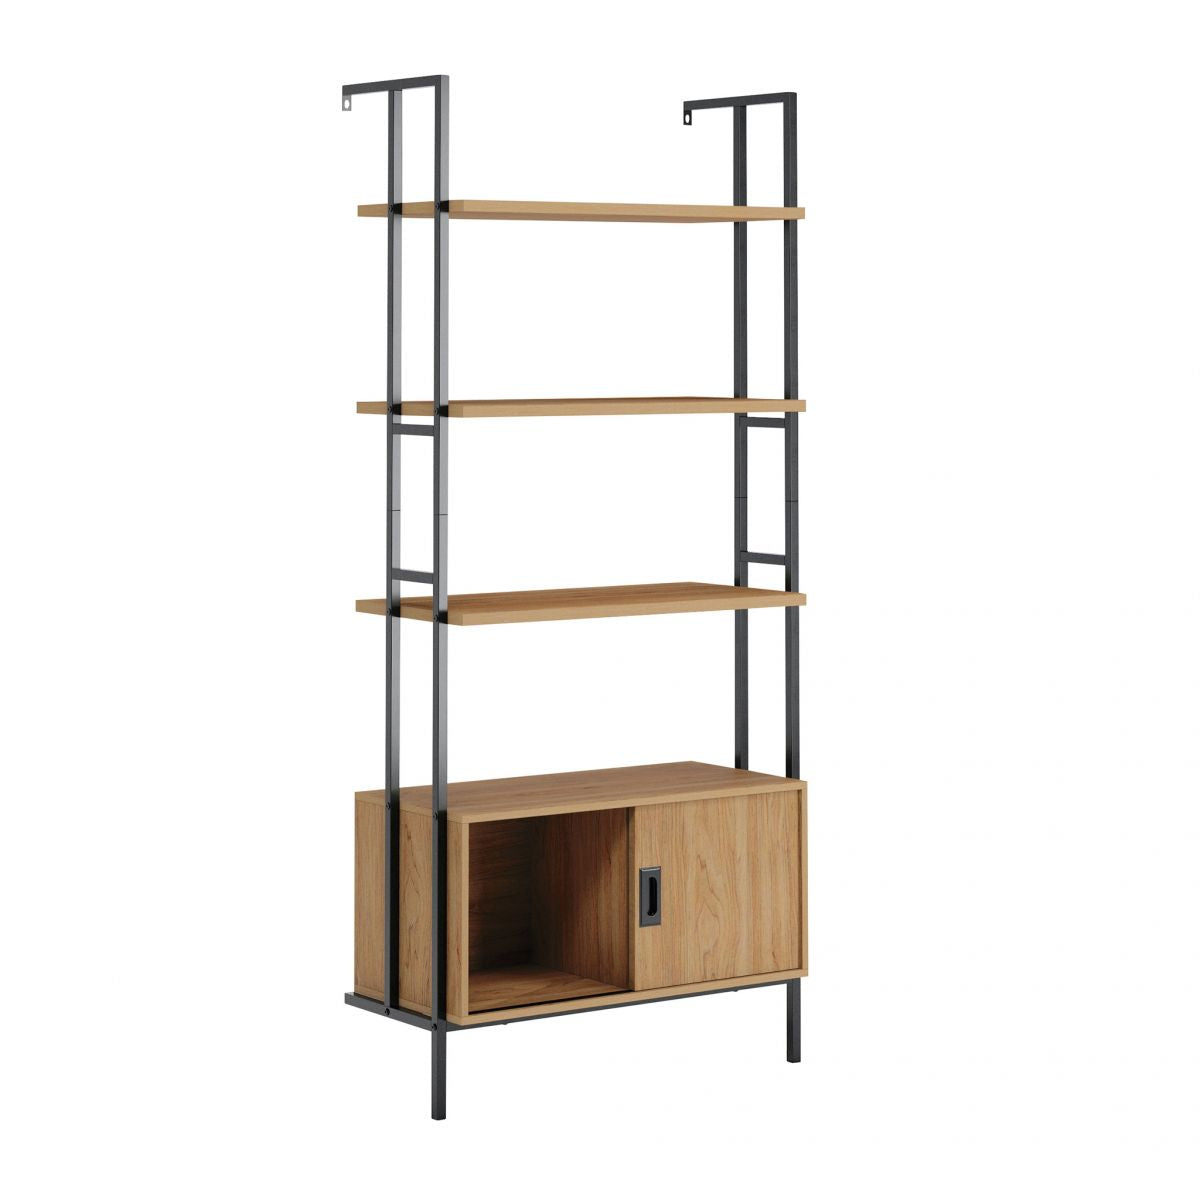 HYTHE WALL MOUNTED 4 SHELF BOOKCASE WITH DOOR CasaFenix